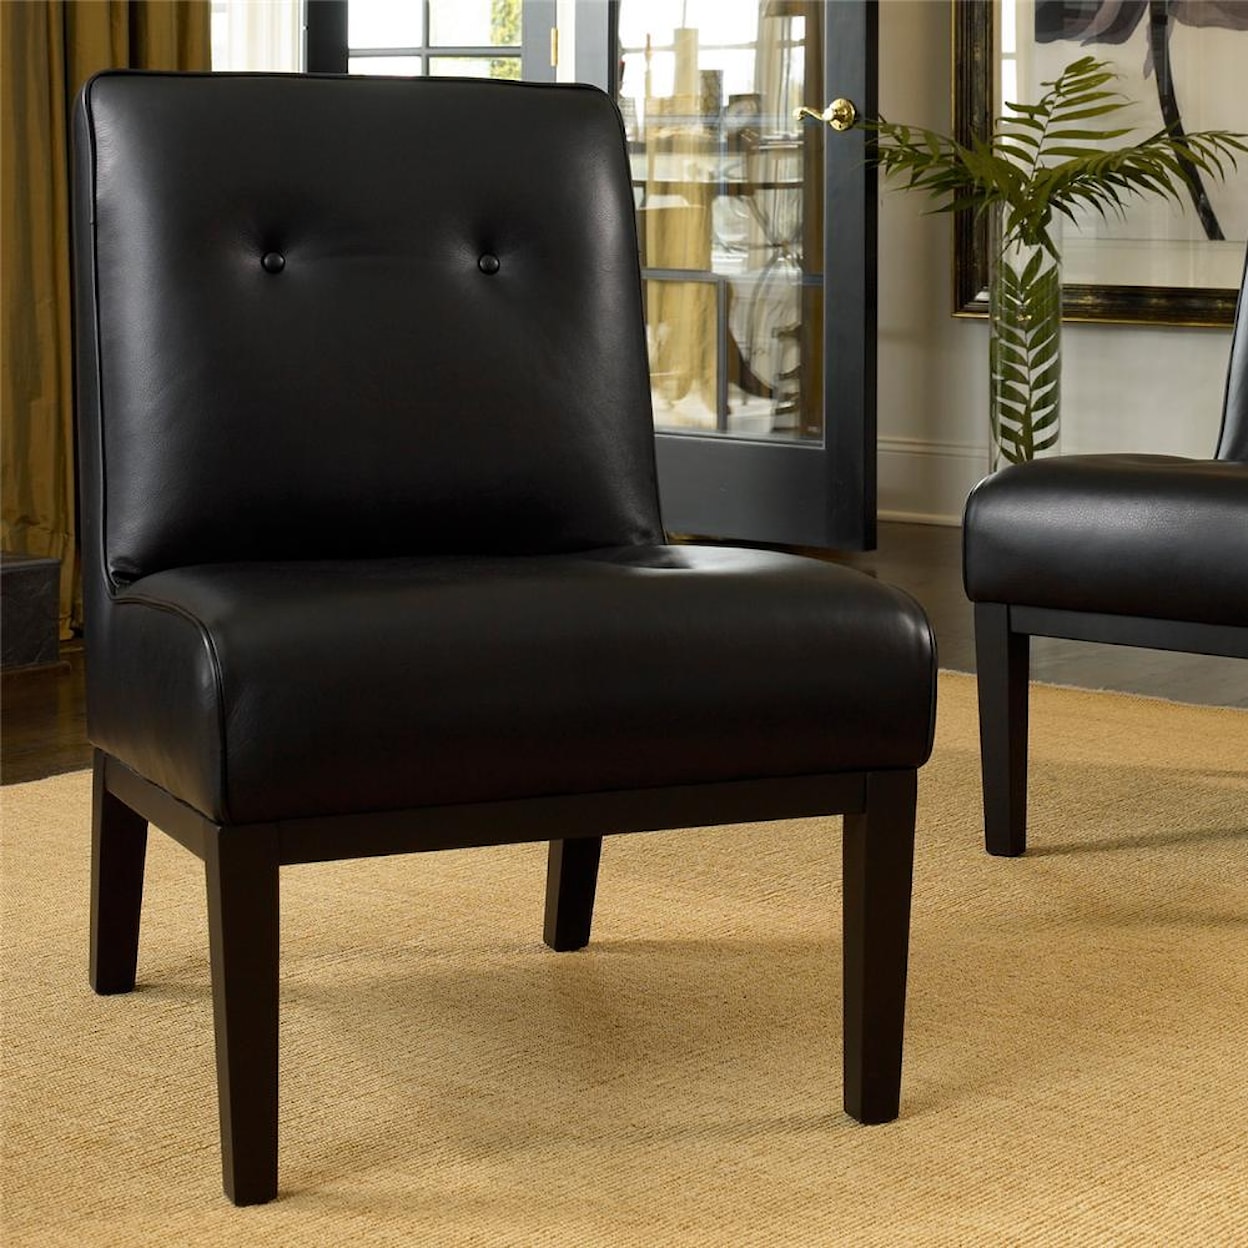 Smith Brothers 995 Chair